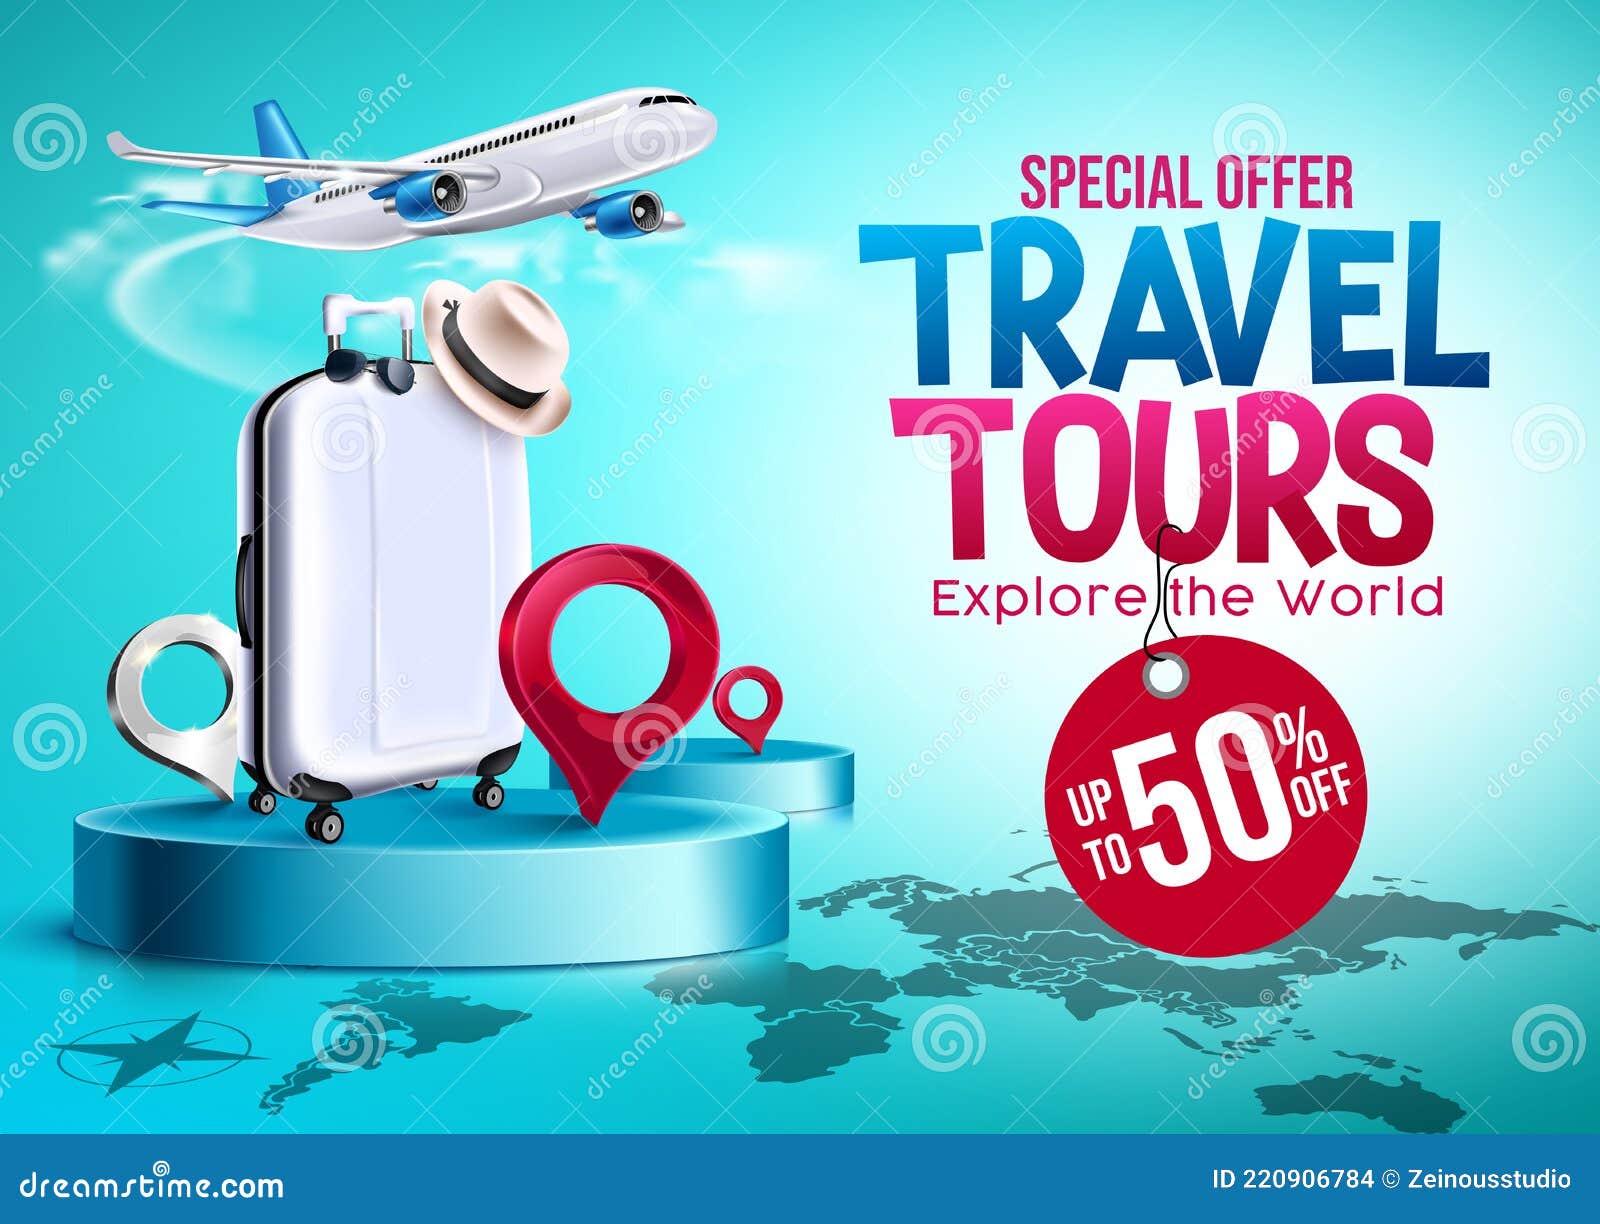 special offer travel sites